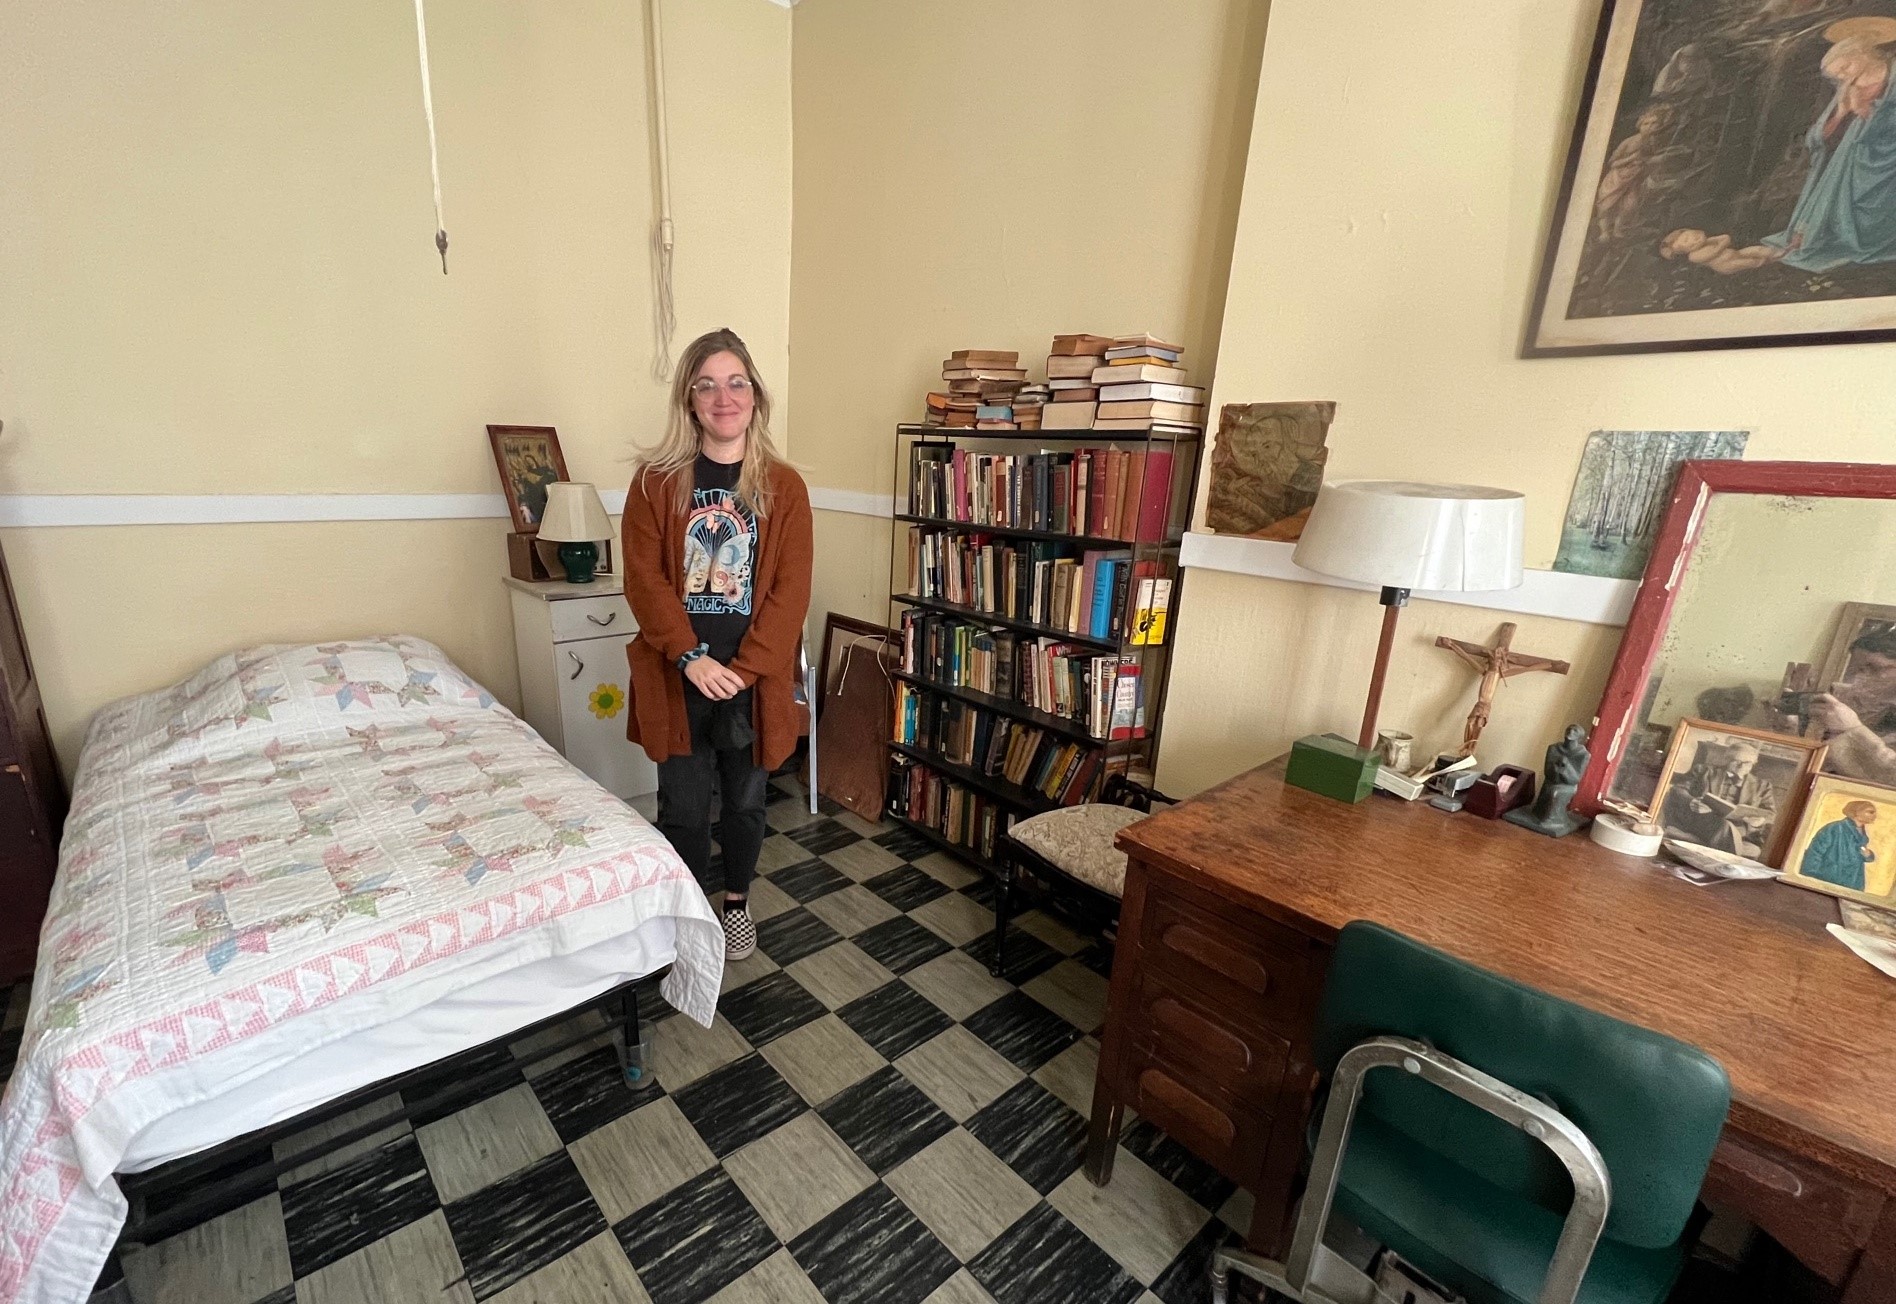 The author stands in Dorothy Day's former bedroom.